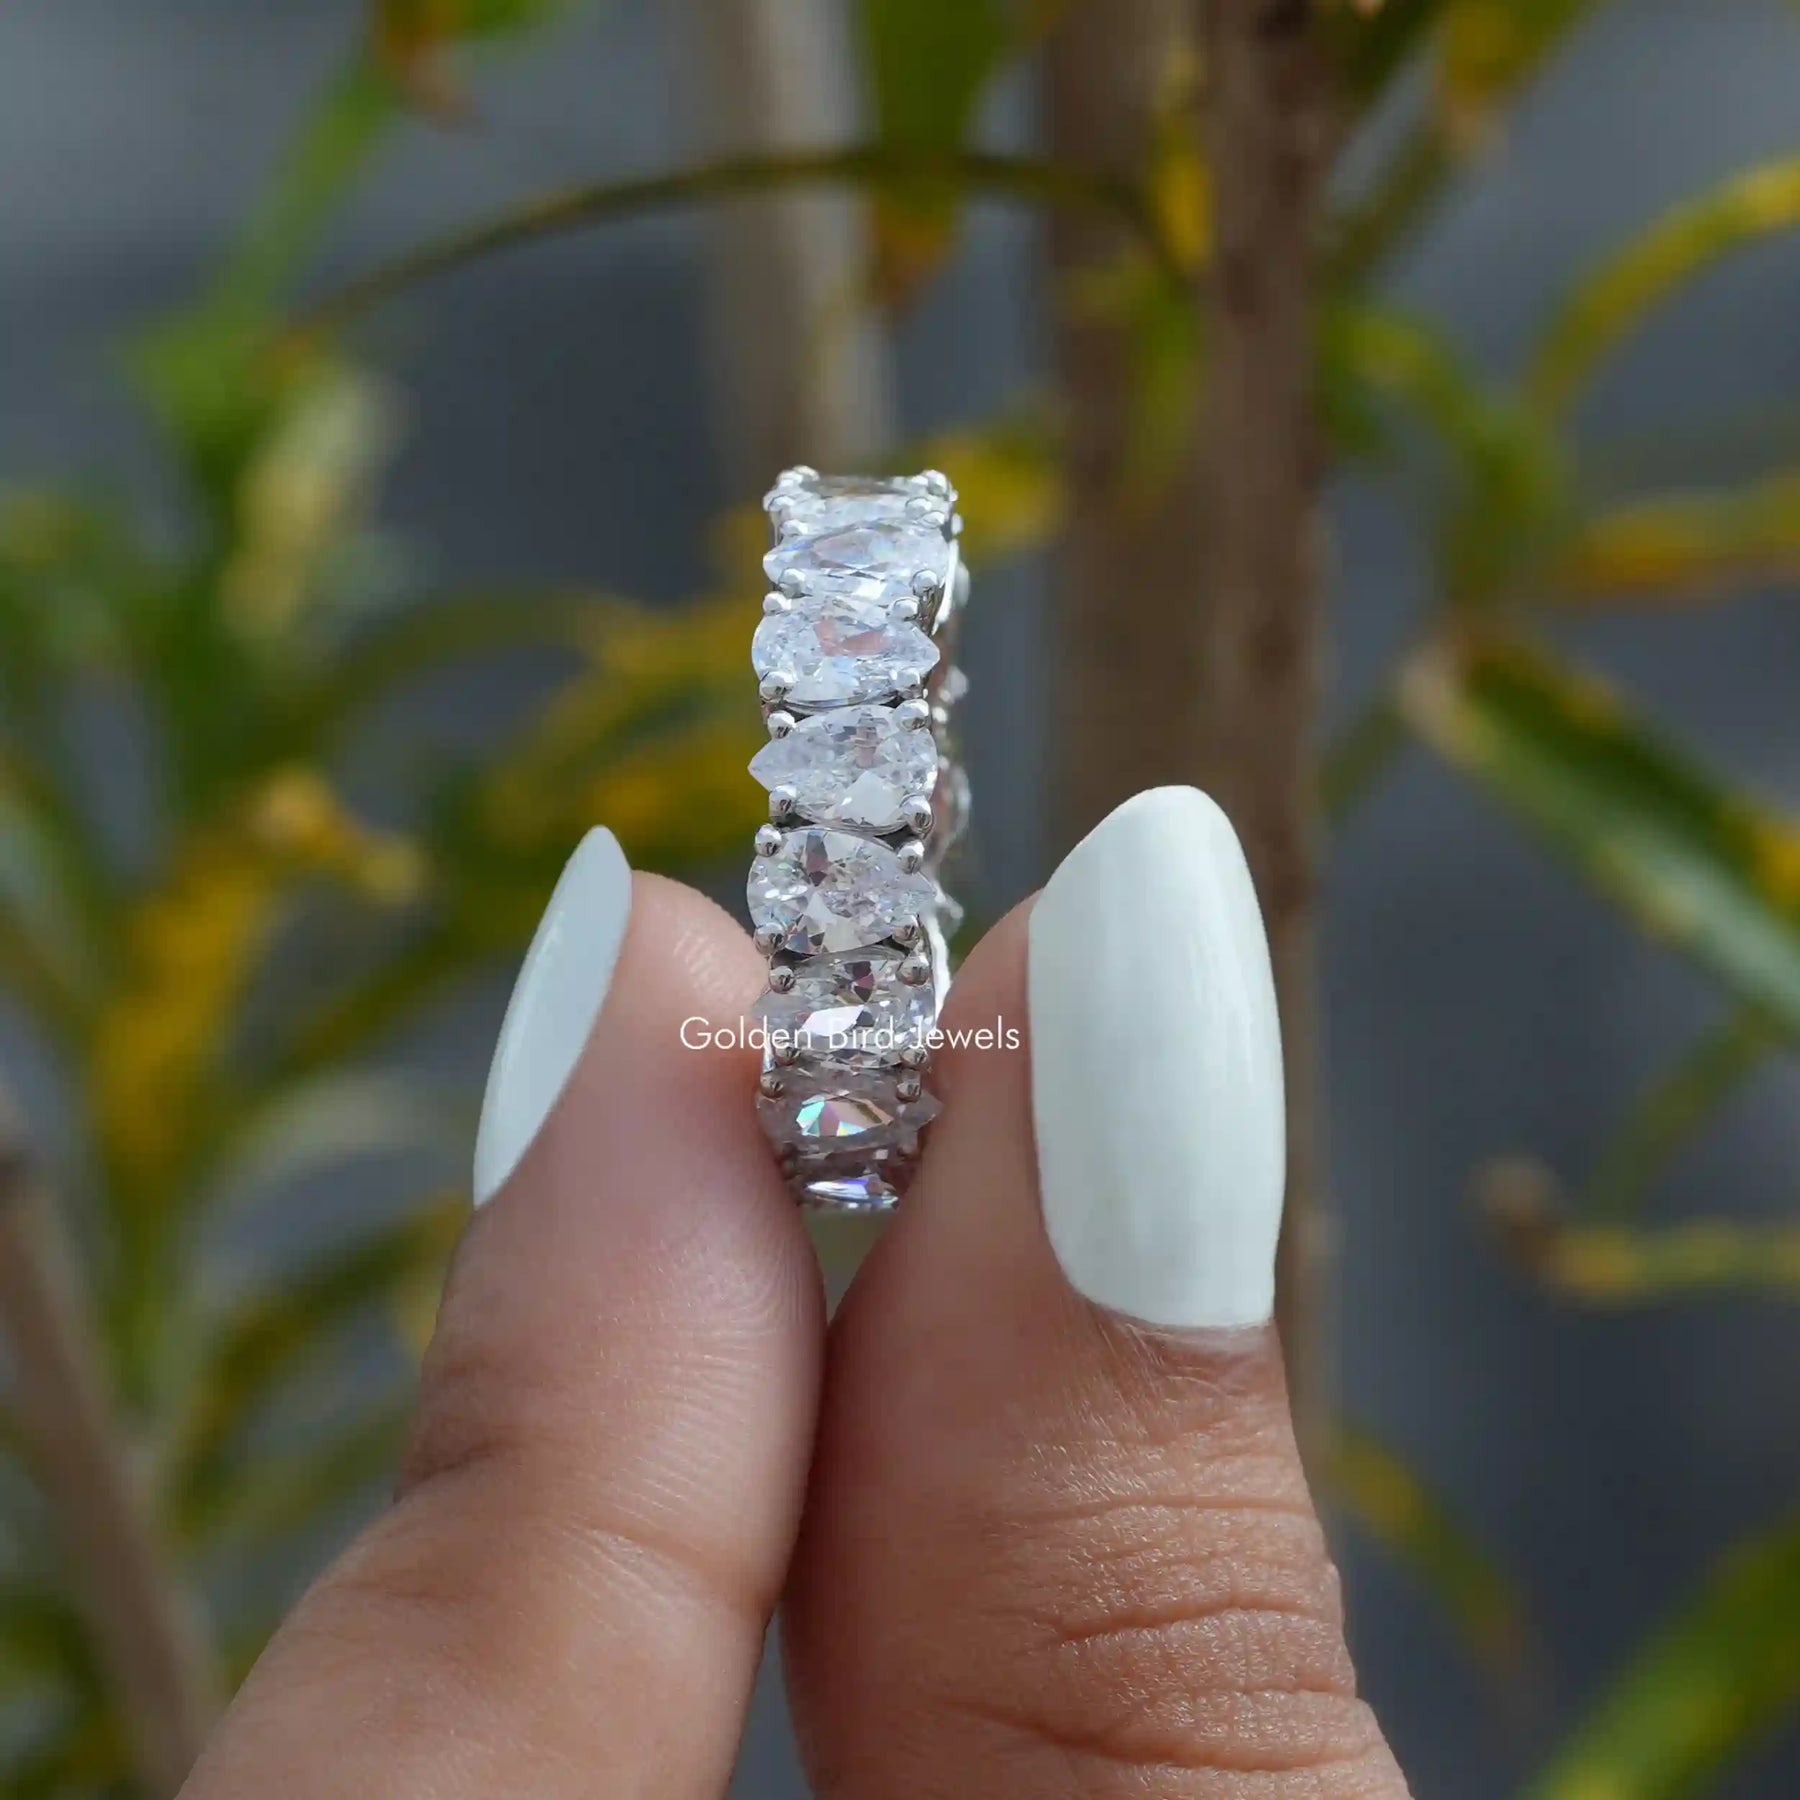 [In two finger front view of wedding eternity band made of white gold]-[Golden Bird Jewels]